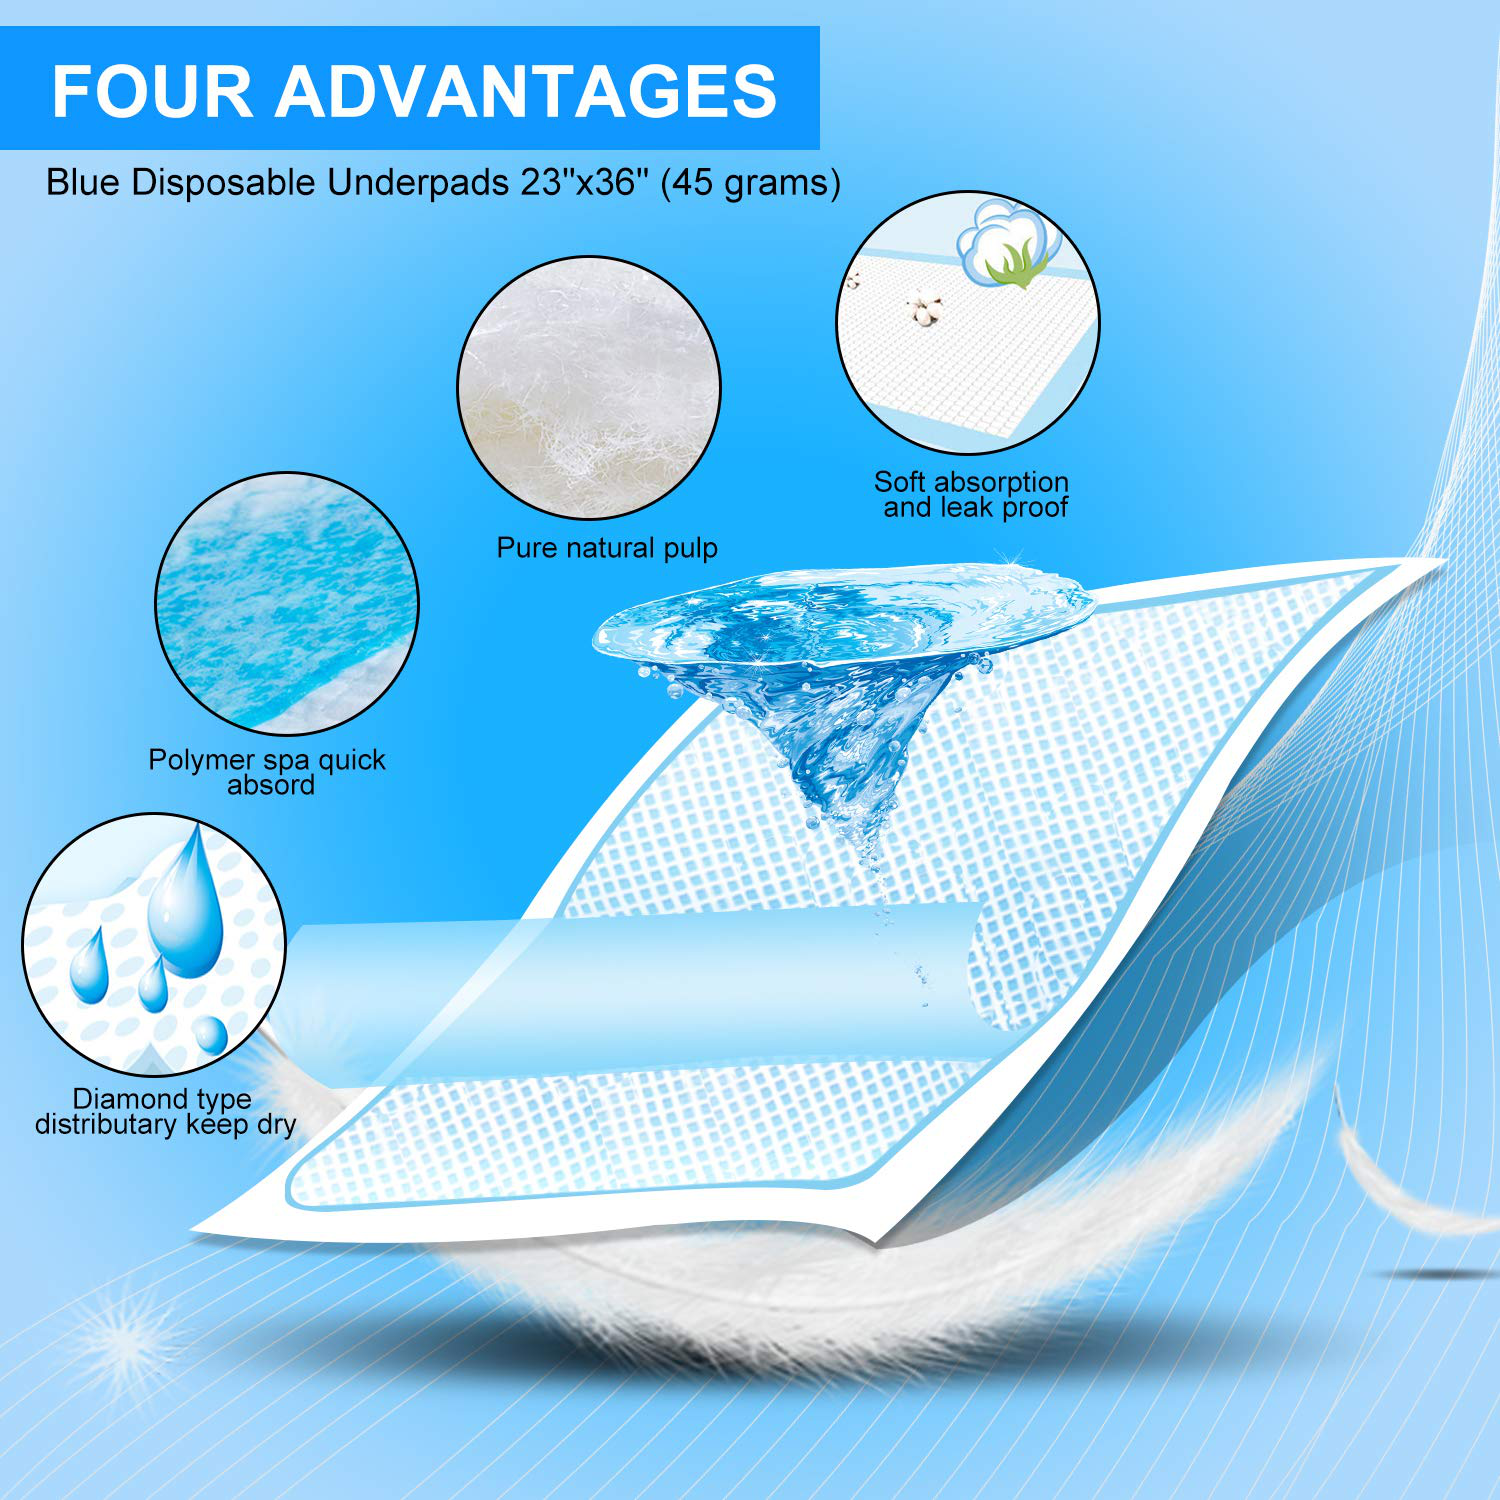 Disposable Large Changing Pads, High Absorbent Waterproof Portable Mattress, Leak-Proof Breathable Incontinence Pad, Play Sheet Bed Chair Table Mat Protector, Adult Child Baby Pets Underpad